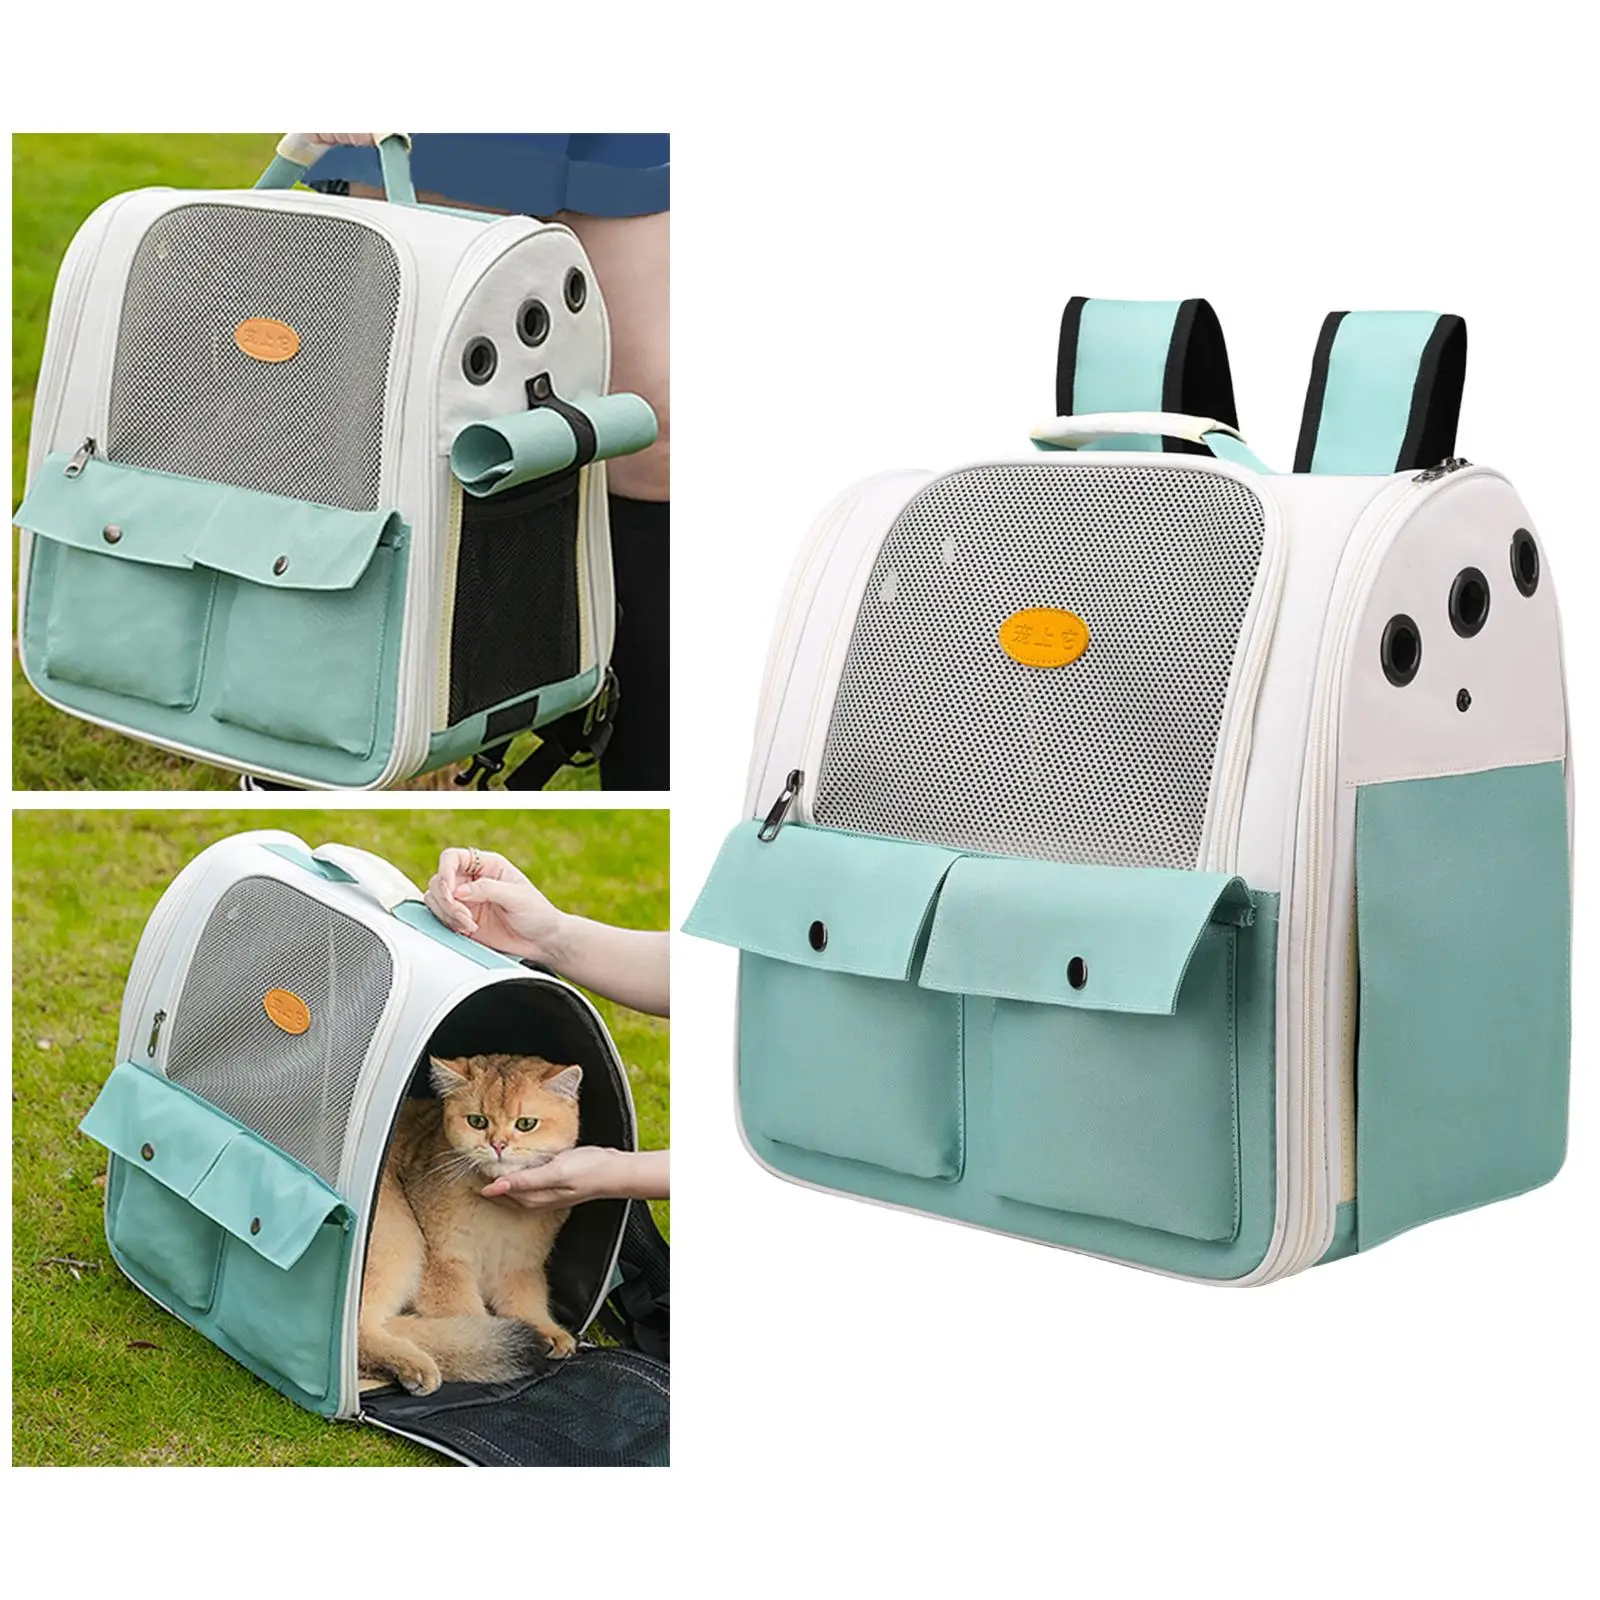 Pet Carrier Collapsible Portable Carrying Bags Handbag for Walking Cat, Dog